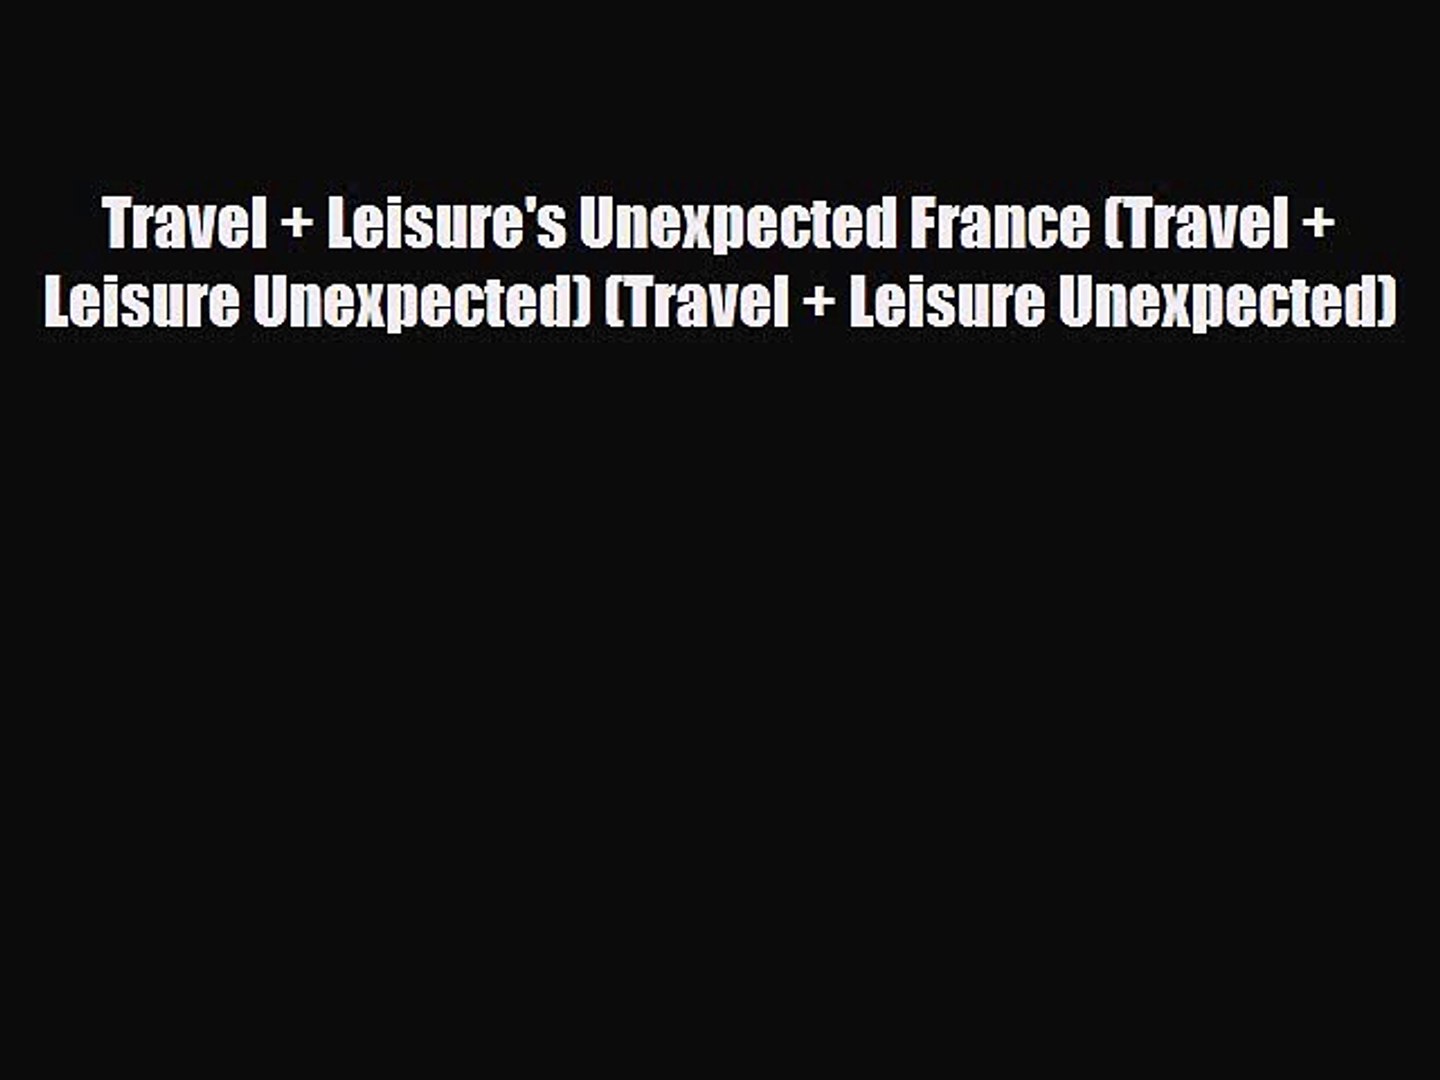 Download Travel + Leisure's Unexpected France (Travel + Leisure Unexpected) (Travel + Leisure